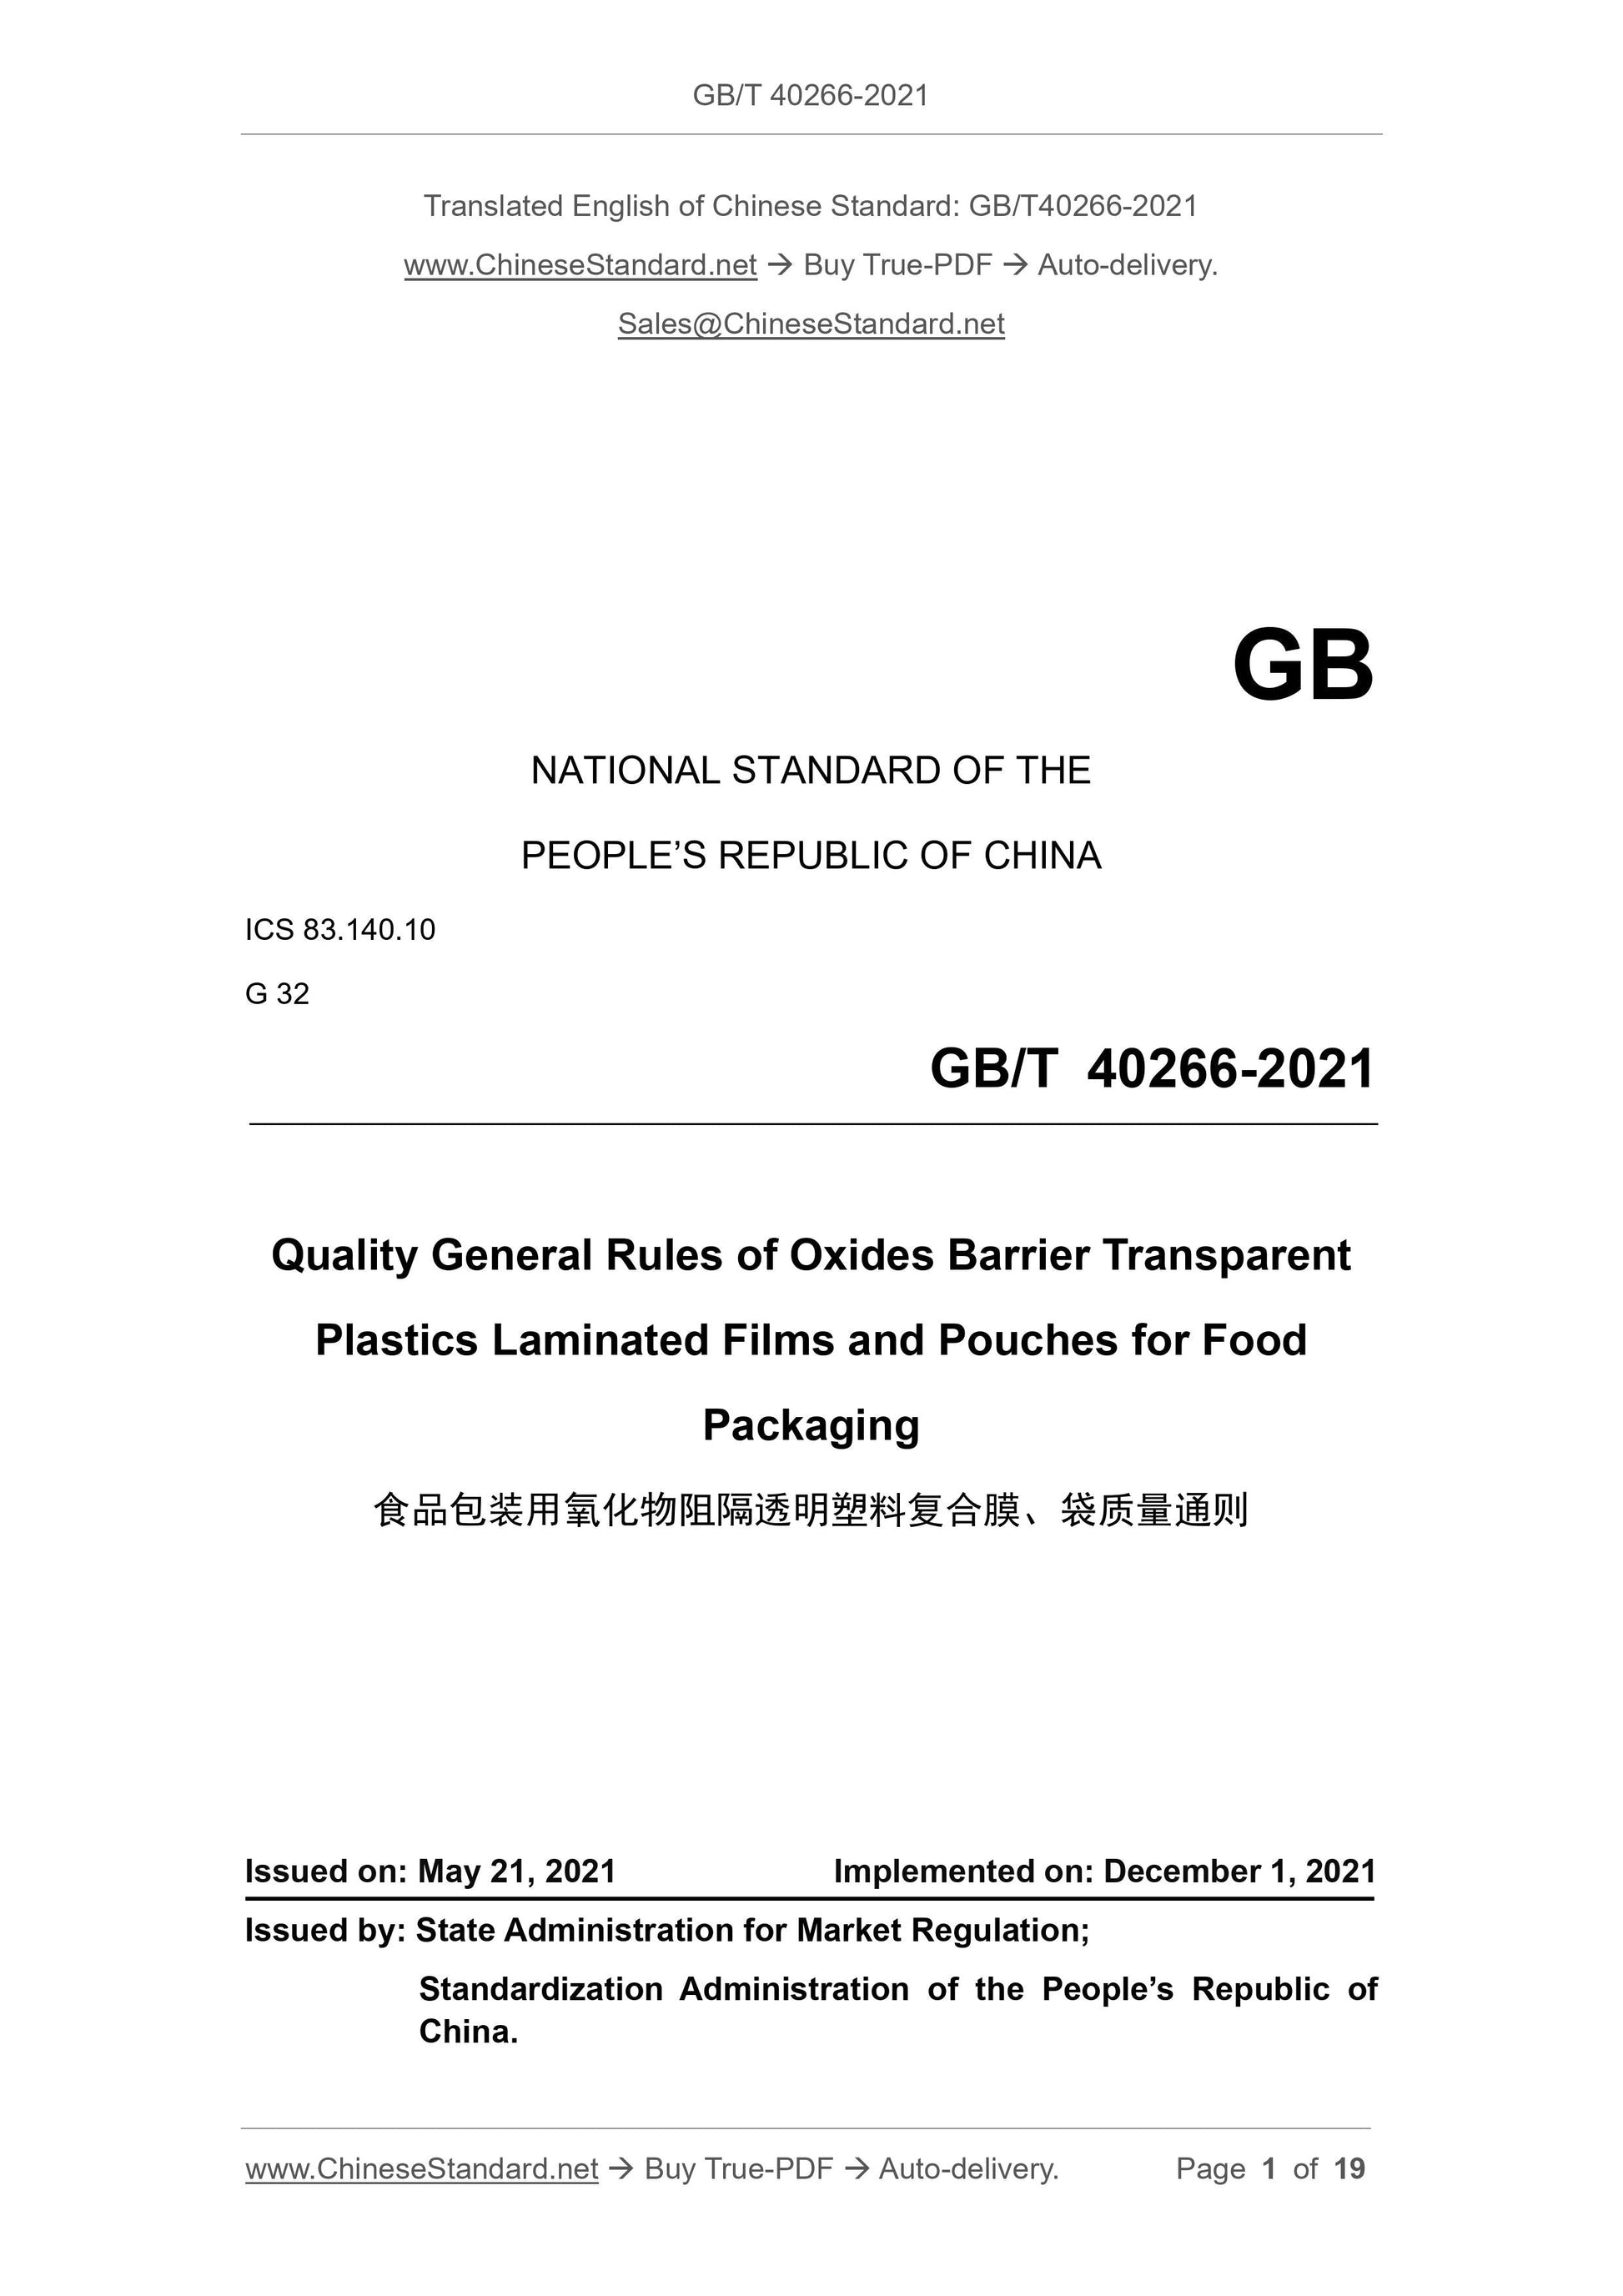 GB/T 40266-2021 Page 1